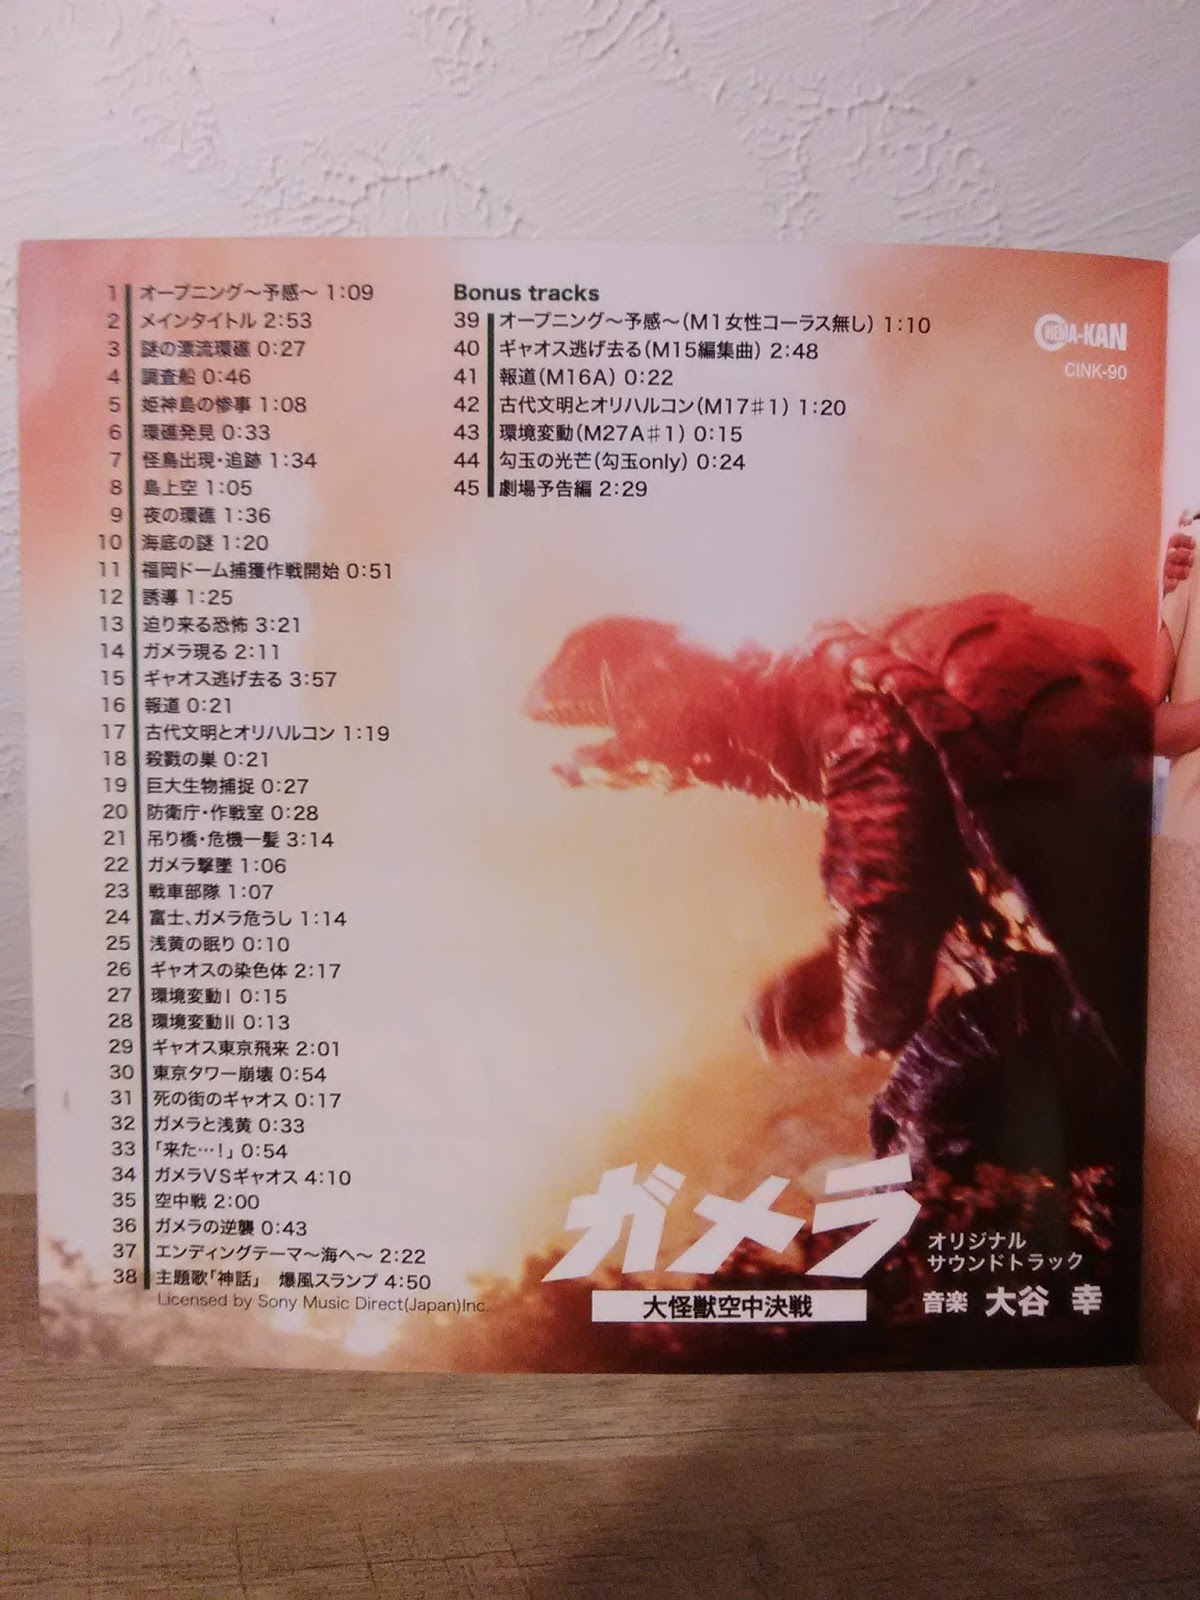 The World of Japanese Film and Television Scores: Heisei Gamera